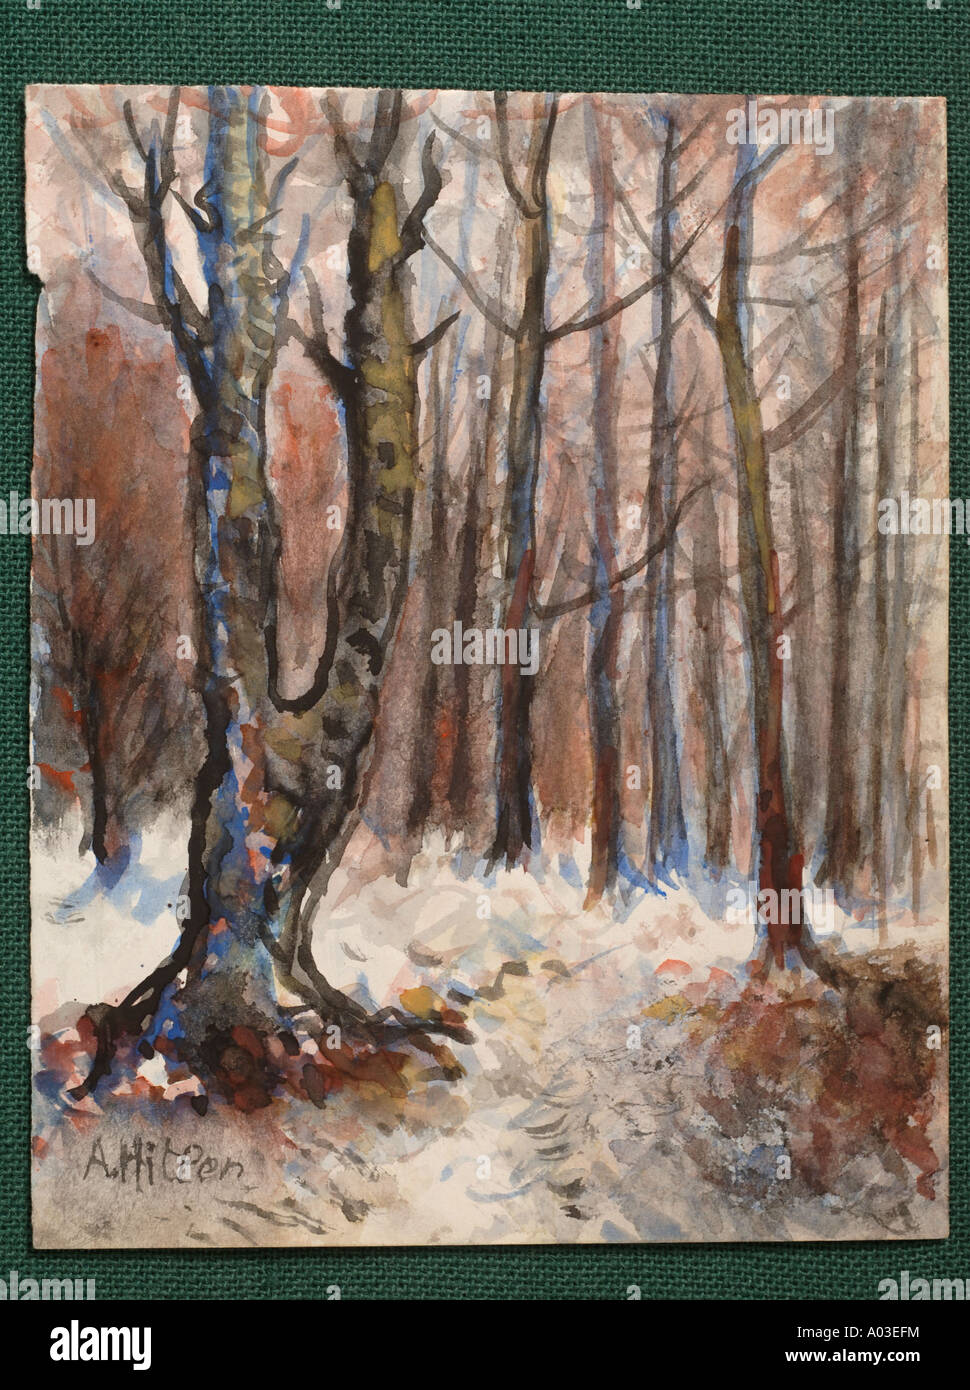 A WOODLAND SCENE IN SNOW PART OF A COLLECTION OF OIL PAINTINGS 1914 1918 PURPORTED TO BE BY ADOLF HITLER Stock Photo